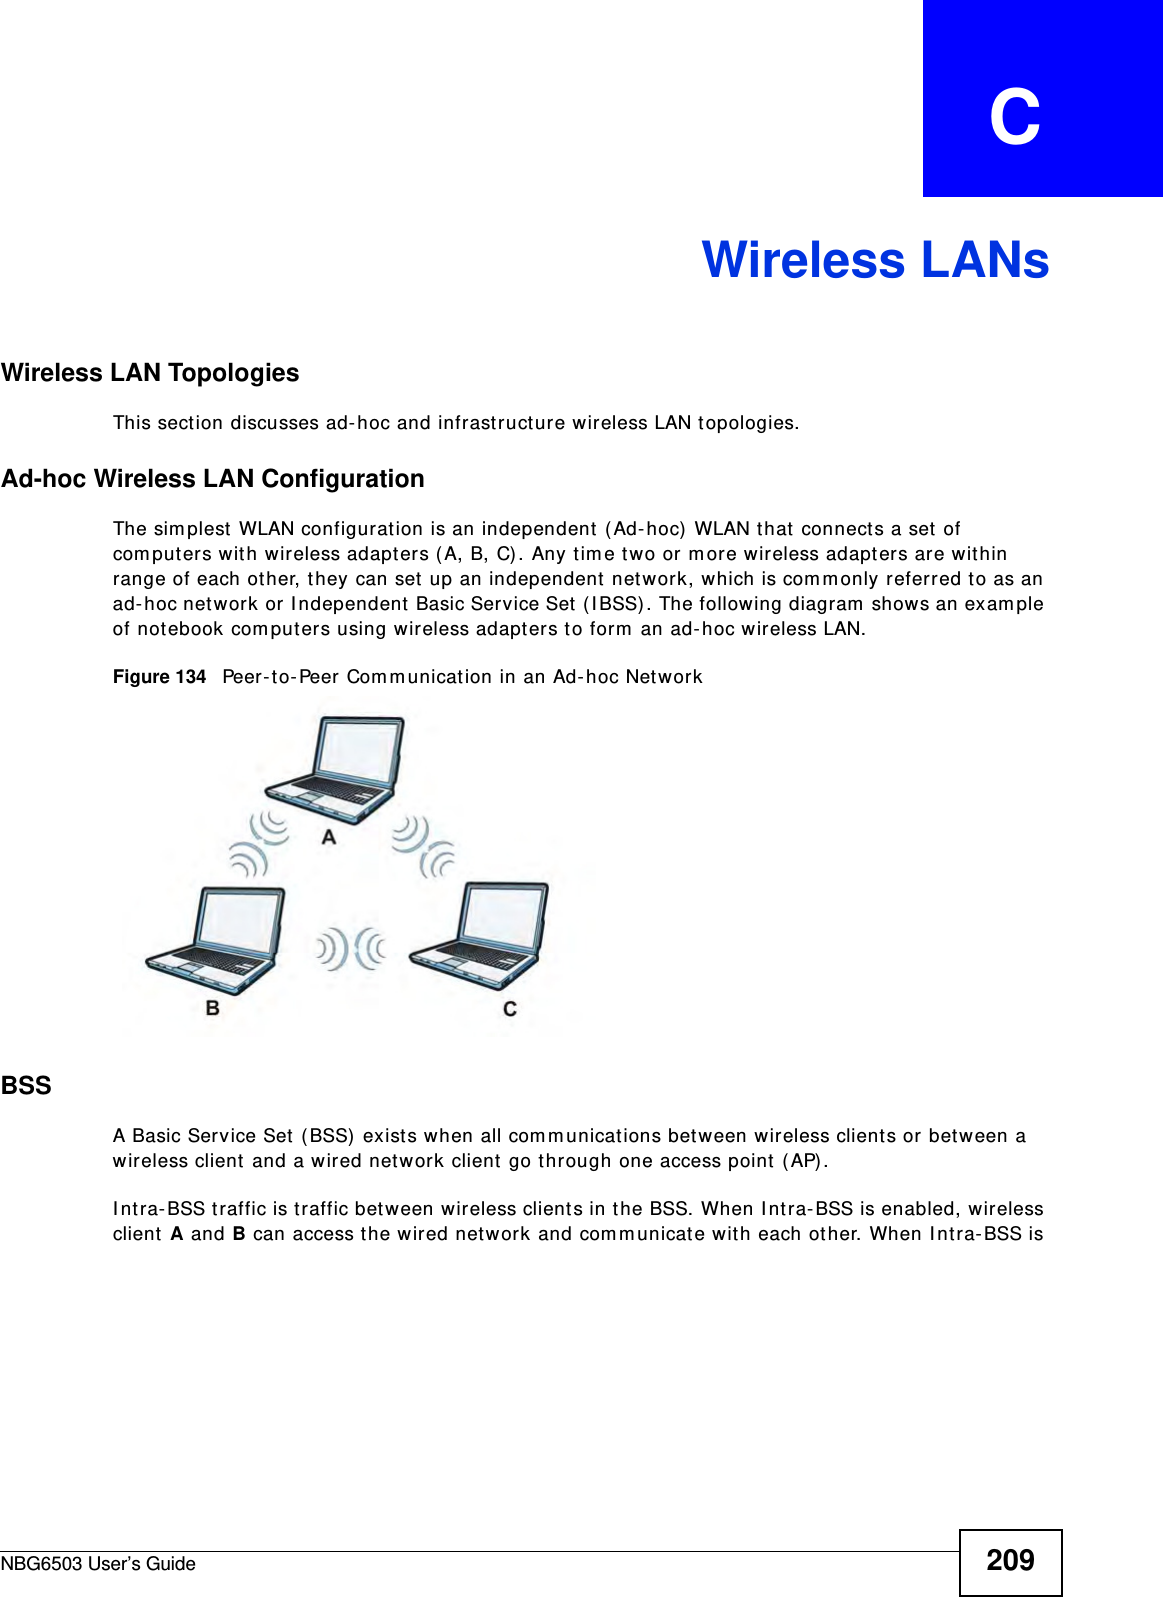 NBG6503 User’s Guide 209APPENDIX   CWireless LANsWireless LAN TopologiesThis section discusses ad-hoc and infrastructure wireless LAN topologies.Ad-hoc Wireless LAN ConfigurationThe simplest WLAN configuration is an independent (Ad-hoc) WLAN that connects a set of computers with wireless adapters (A, B, C). Any time two or more wireless adapters are within range of each other, they can set up an independent network, which is commonly referred to as an ad-hoc network or Independent Basic Service Set (IBSS). The following diagram shows an example of notebook computers using wireless adapters to form an ad-hoc wireless LAN. Figure 134   Peer-to-Peer Communication in an Ad-hoc NetworkBSSA Basic Service Set (BSS) exists when all communications between wireless clients or between a wireless client and a wired network client go through one access point (AP). Intra-BSS traffic is traffic between wireless clients in the BSS. When Intra-BSS is enabled, wireless client A and B can access the wired network and communicate with each other. When Intra-BSS is 